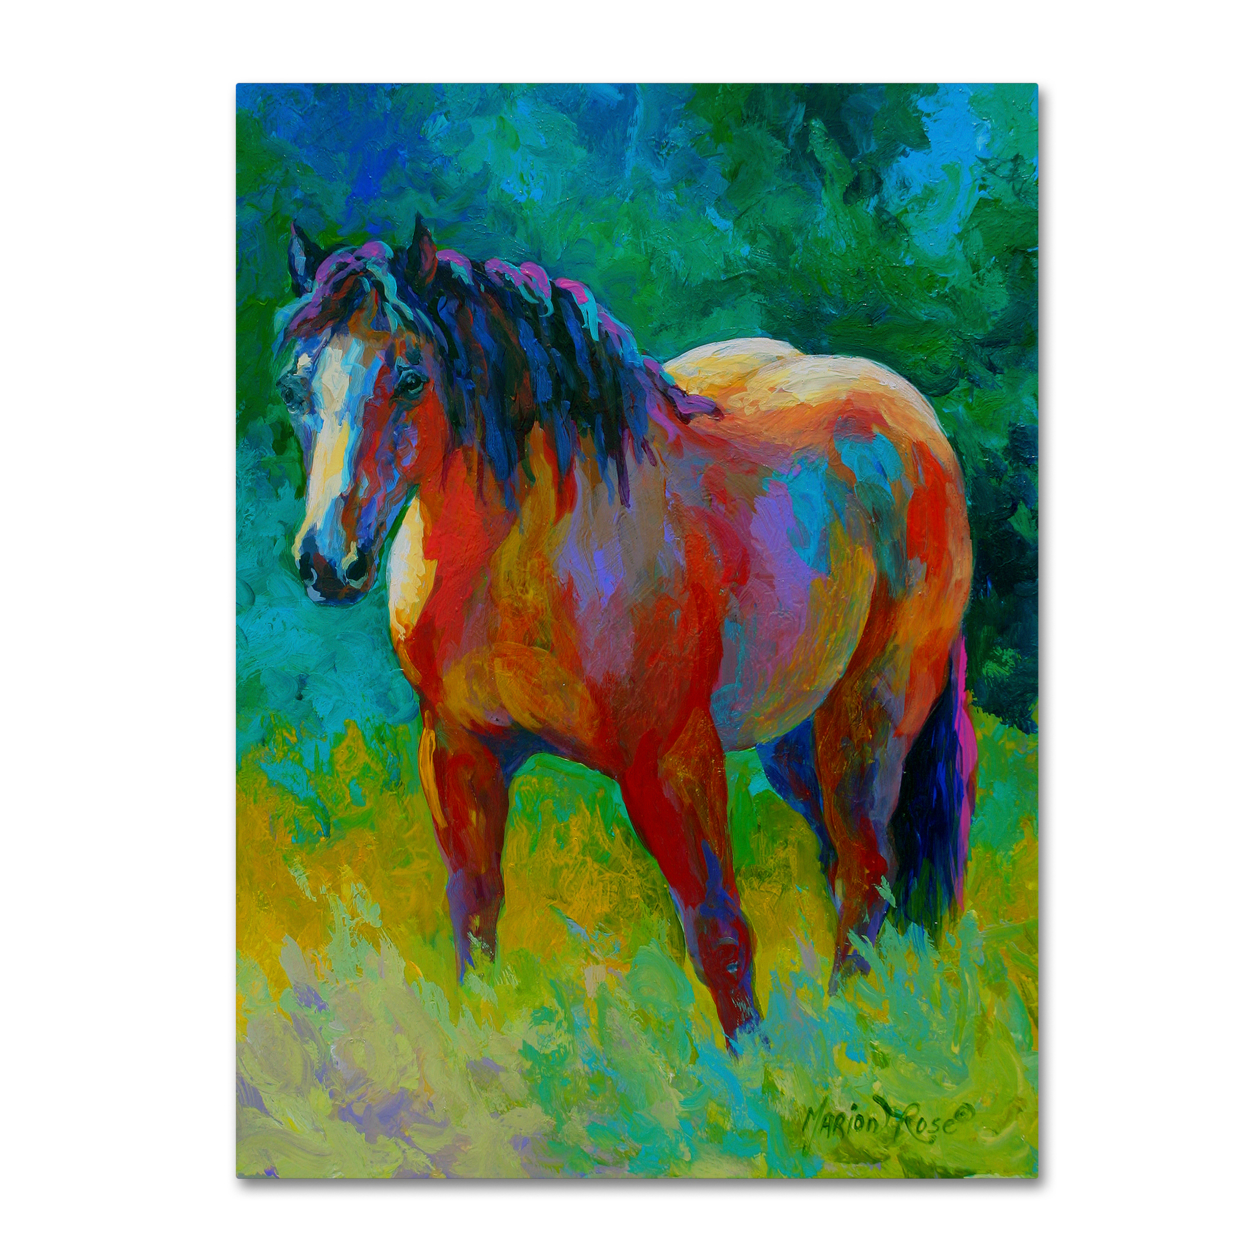 Marion Rose 'Buckskin II' Ready To Hang Canvas Art 18 X 24 Inches Made In USA